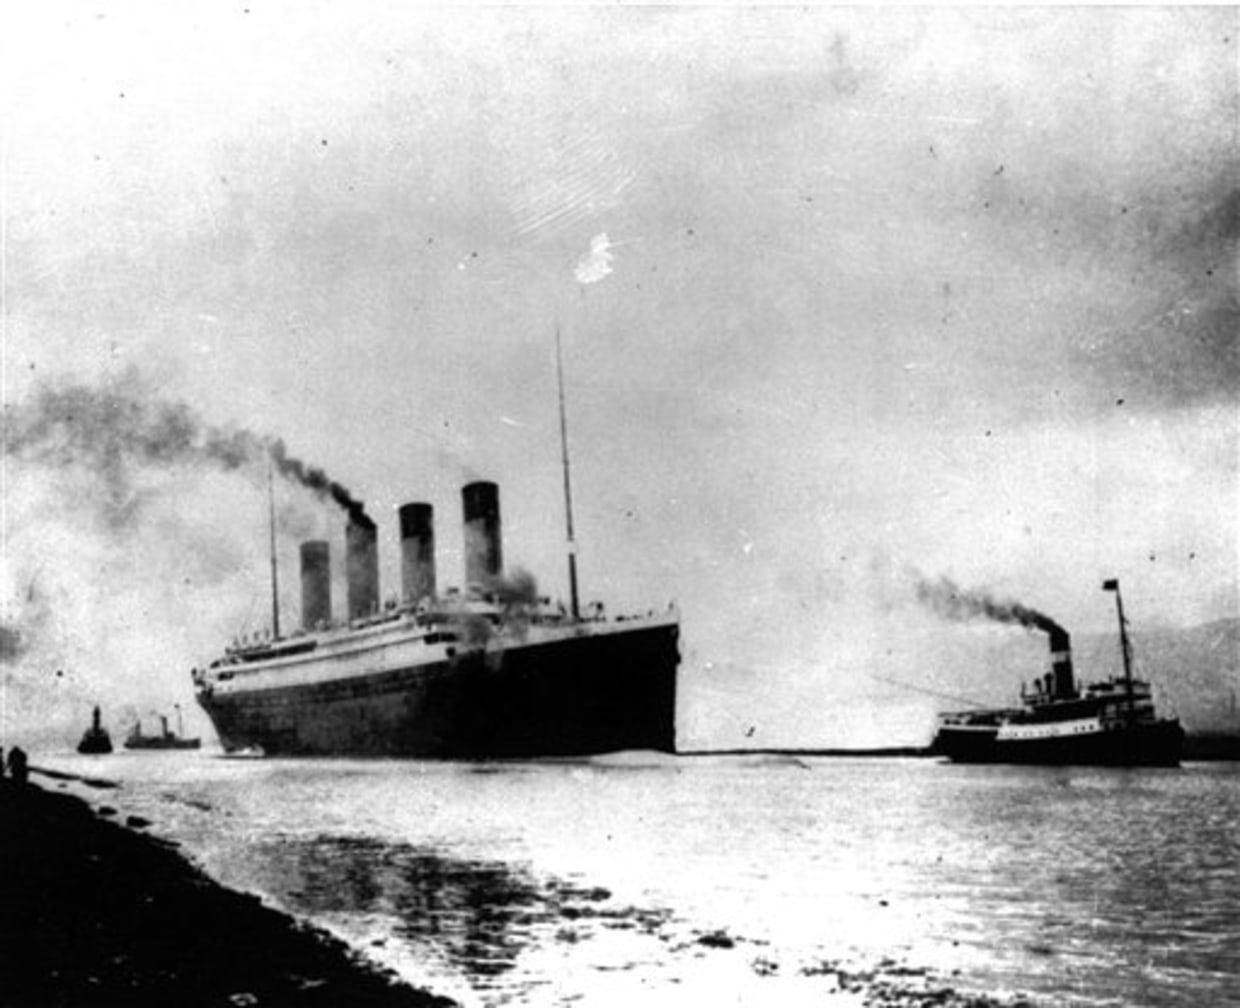 The Real Story Behind the Discovery of Titanic's Watery Grave